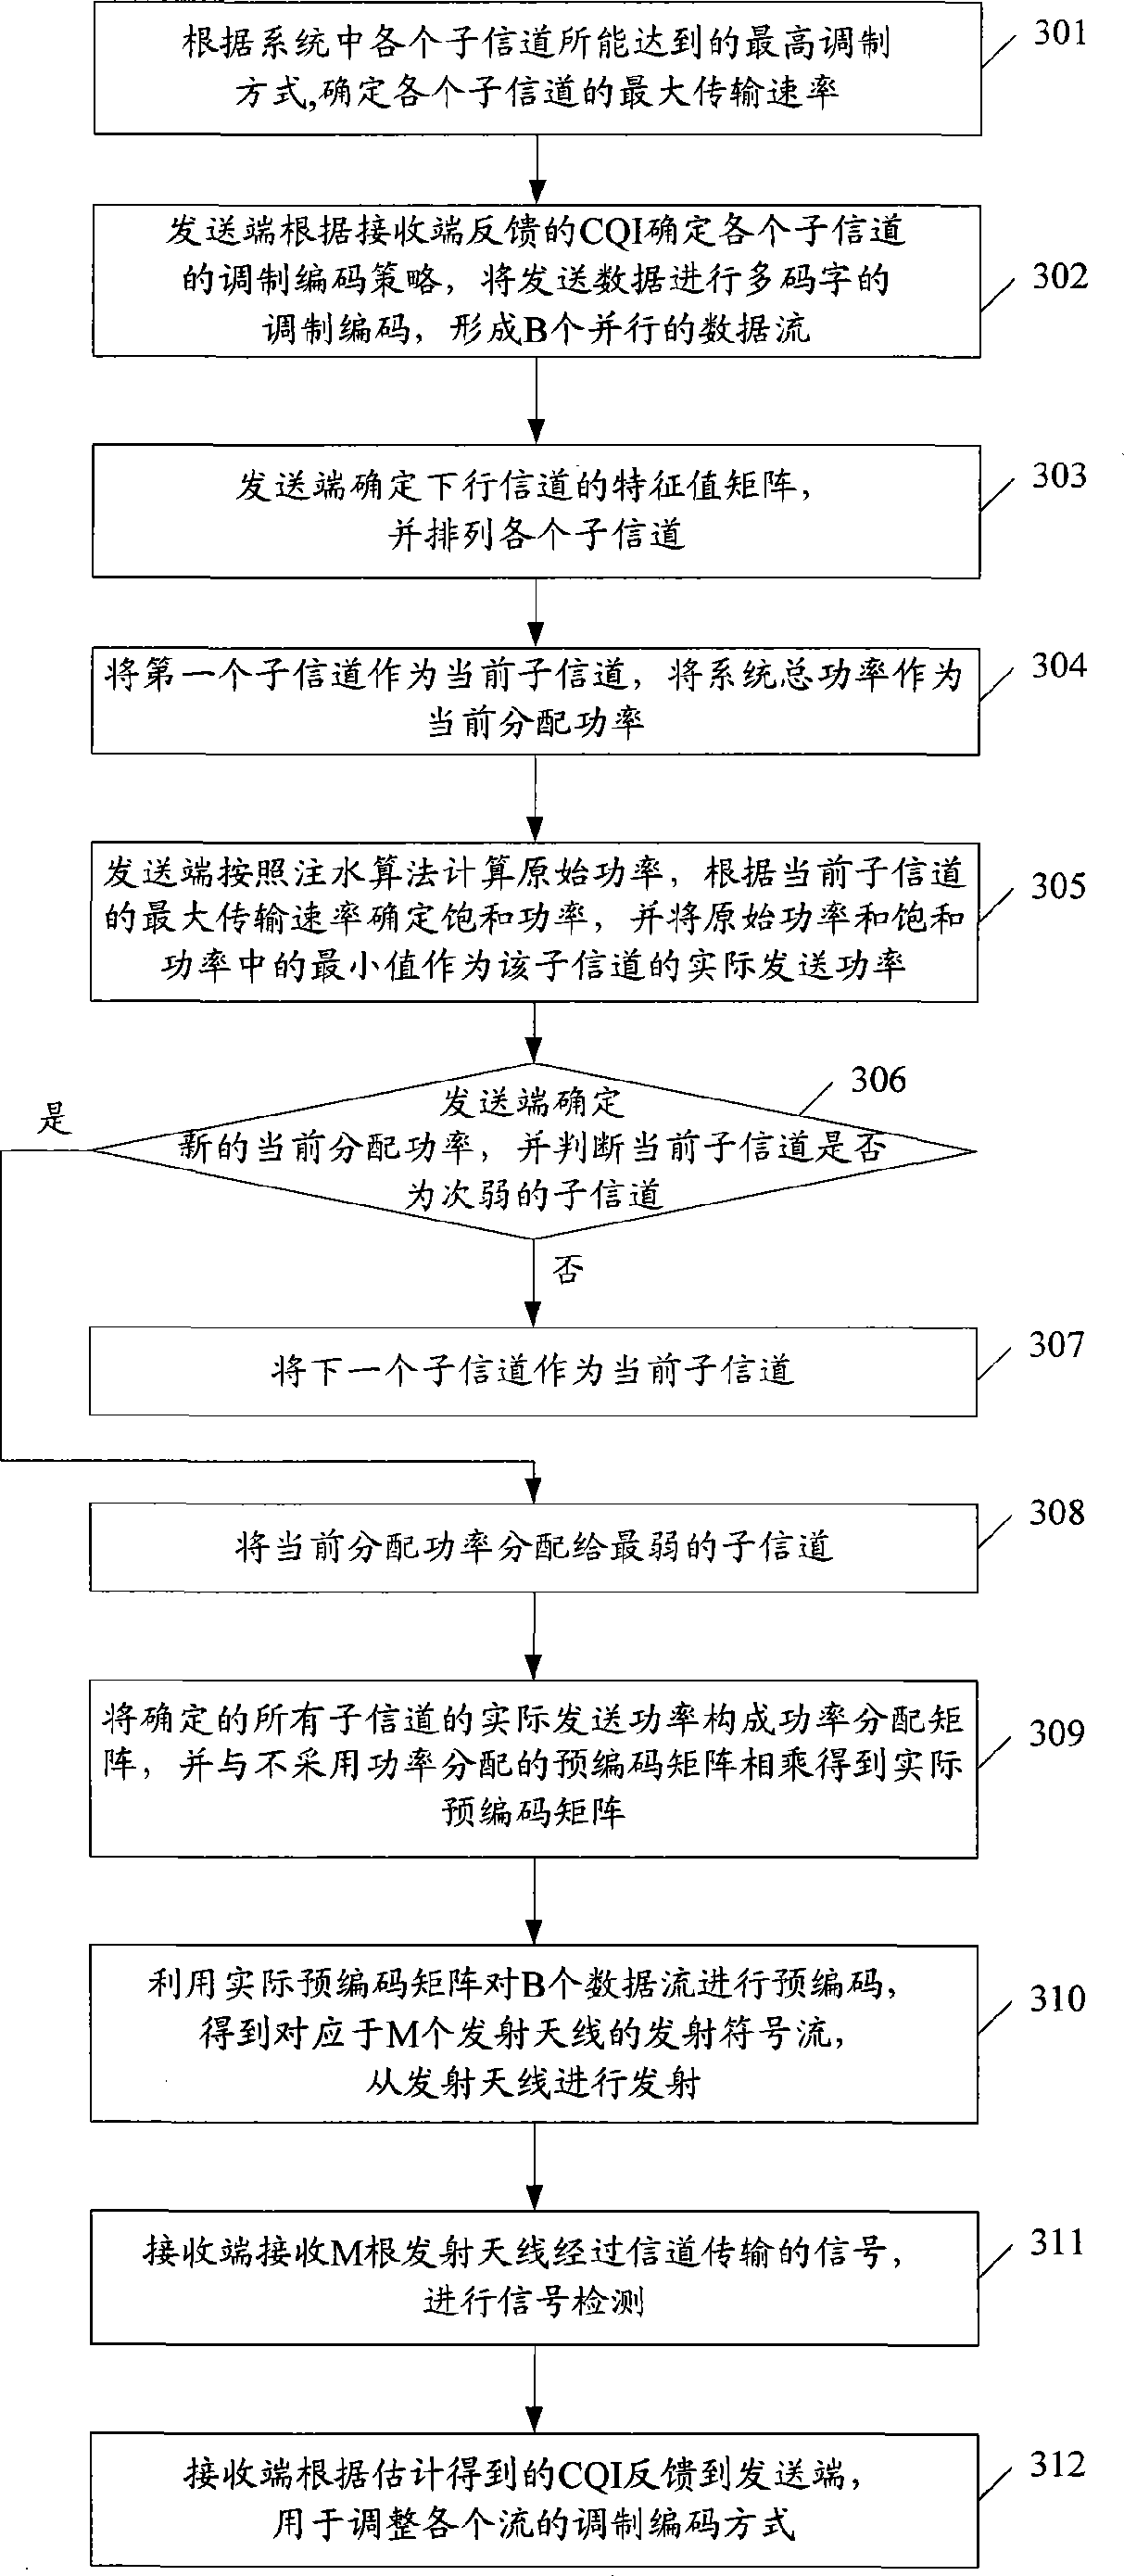 Power allocation method for modulation constrained system